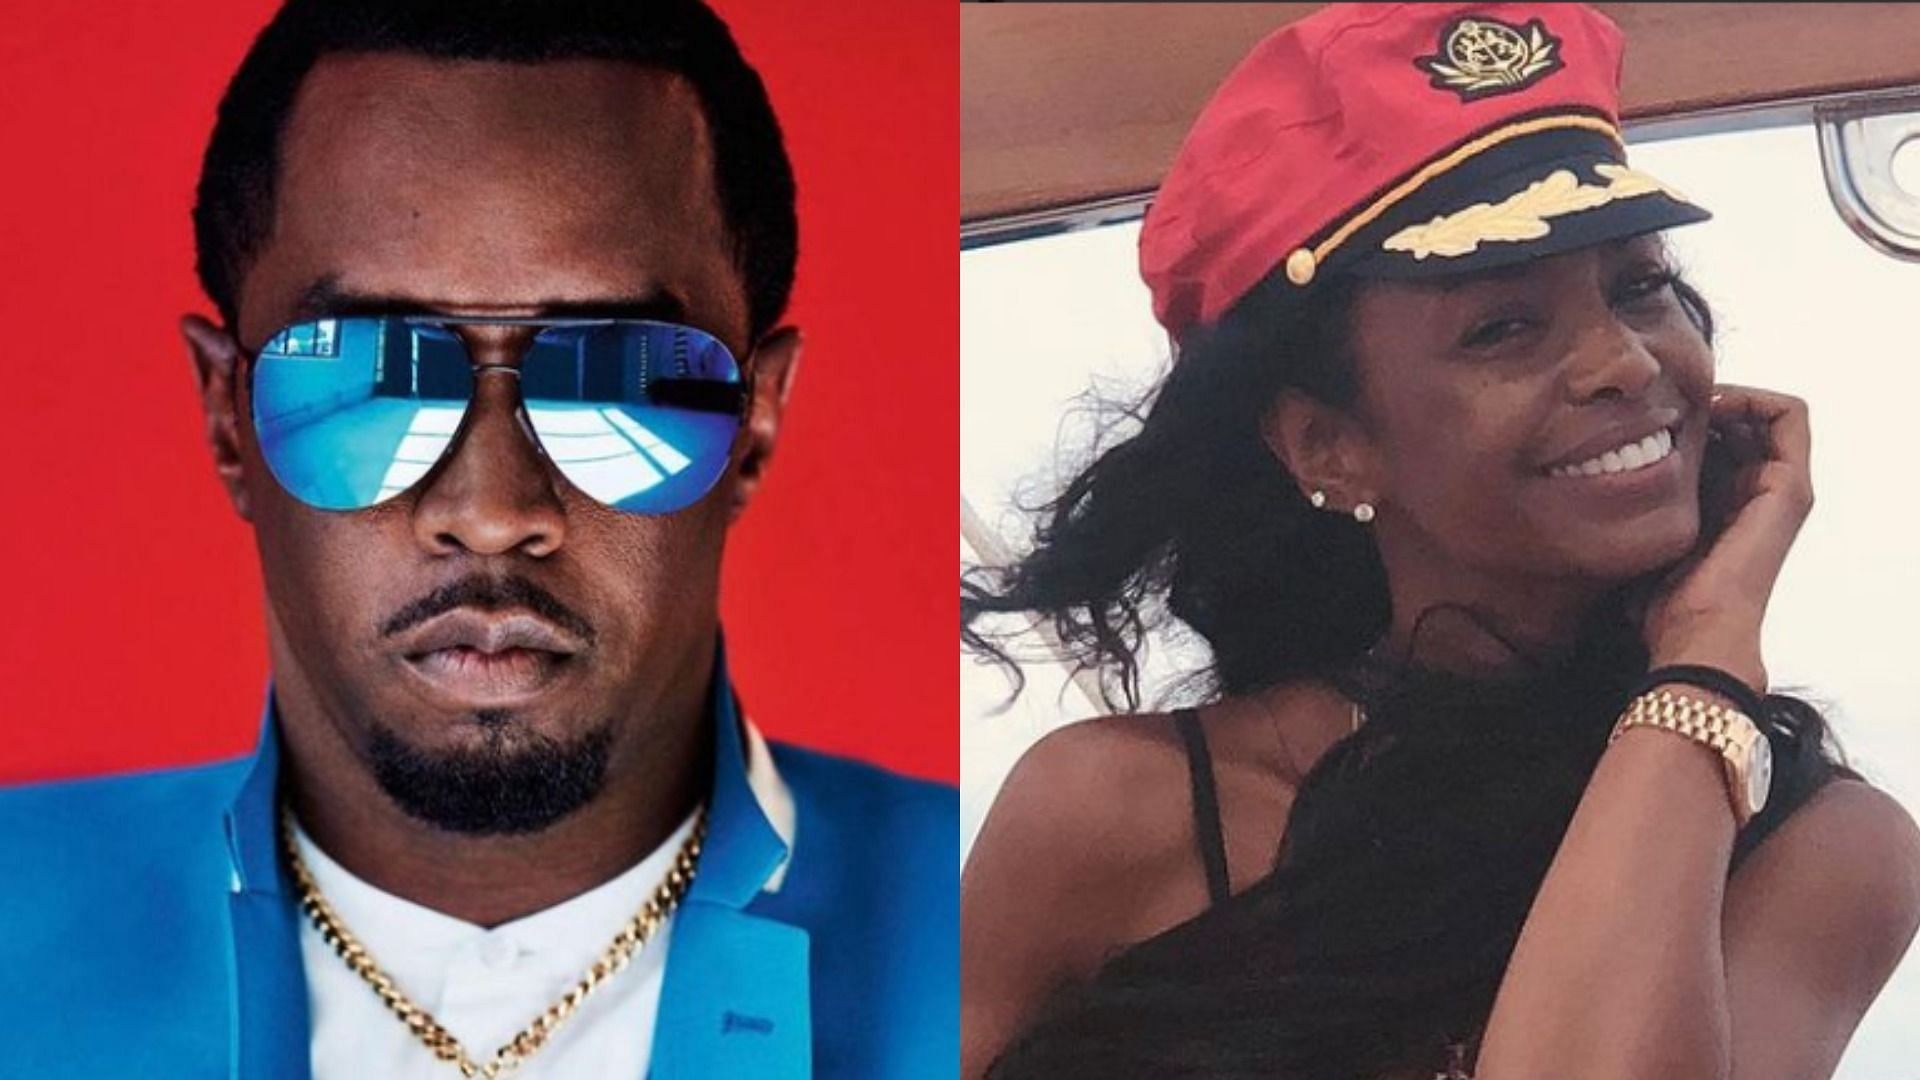 Kim Porter and Diddy dated for 13 years before separating in 2007 (Image via Instagram/ladykp)